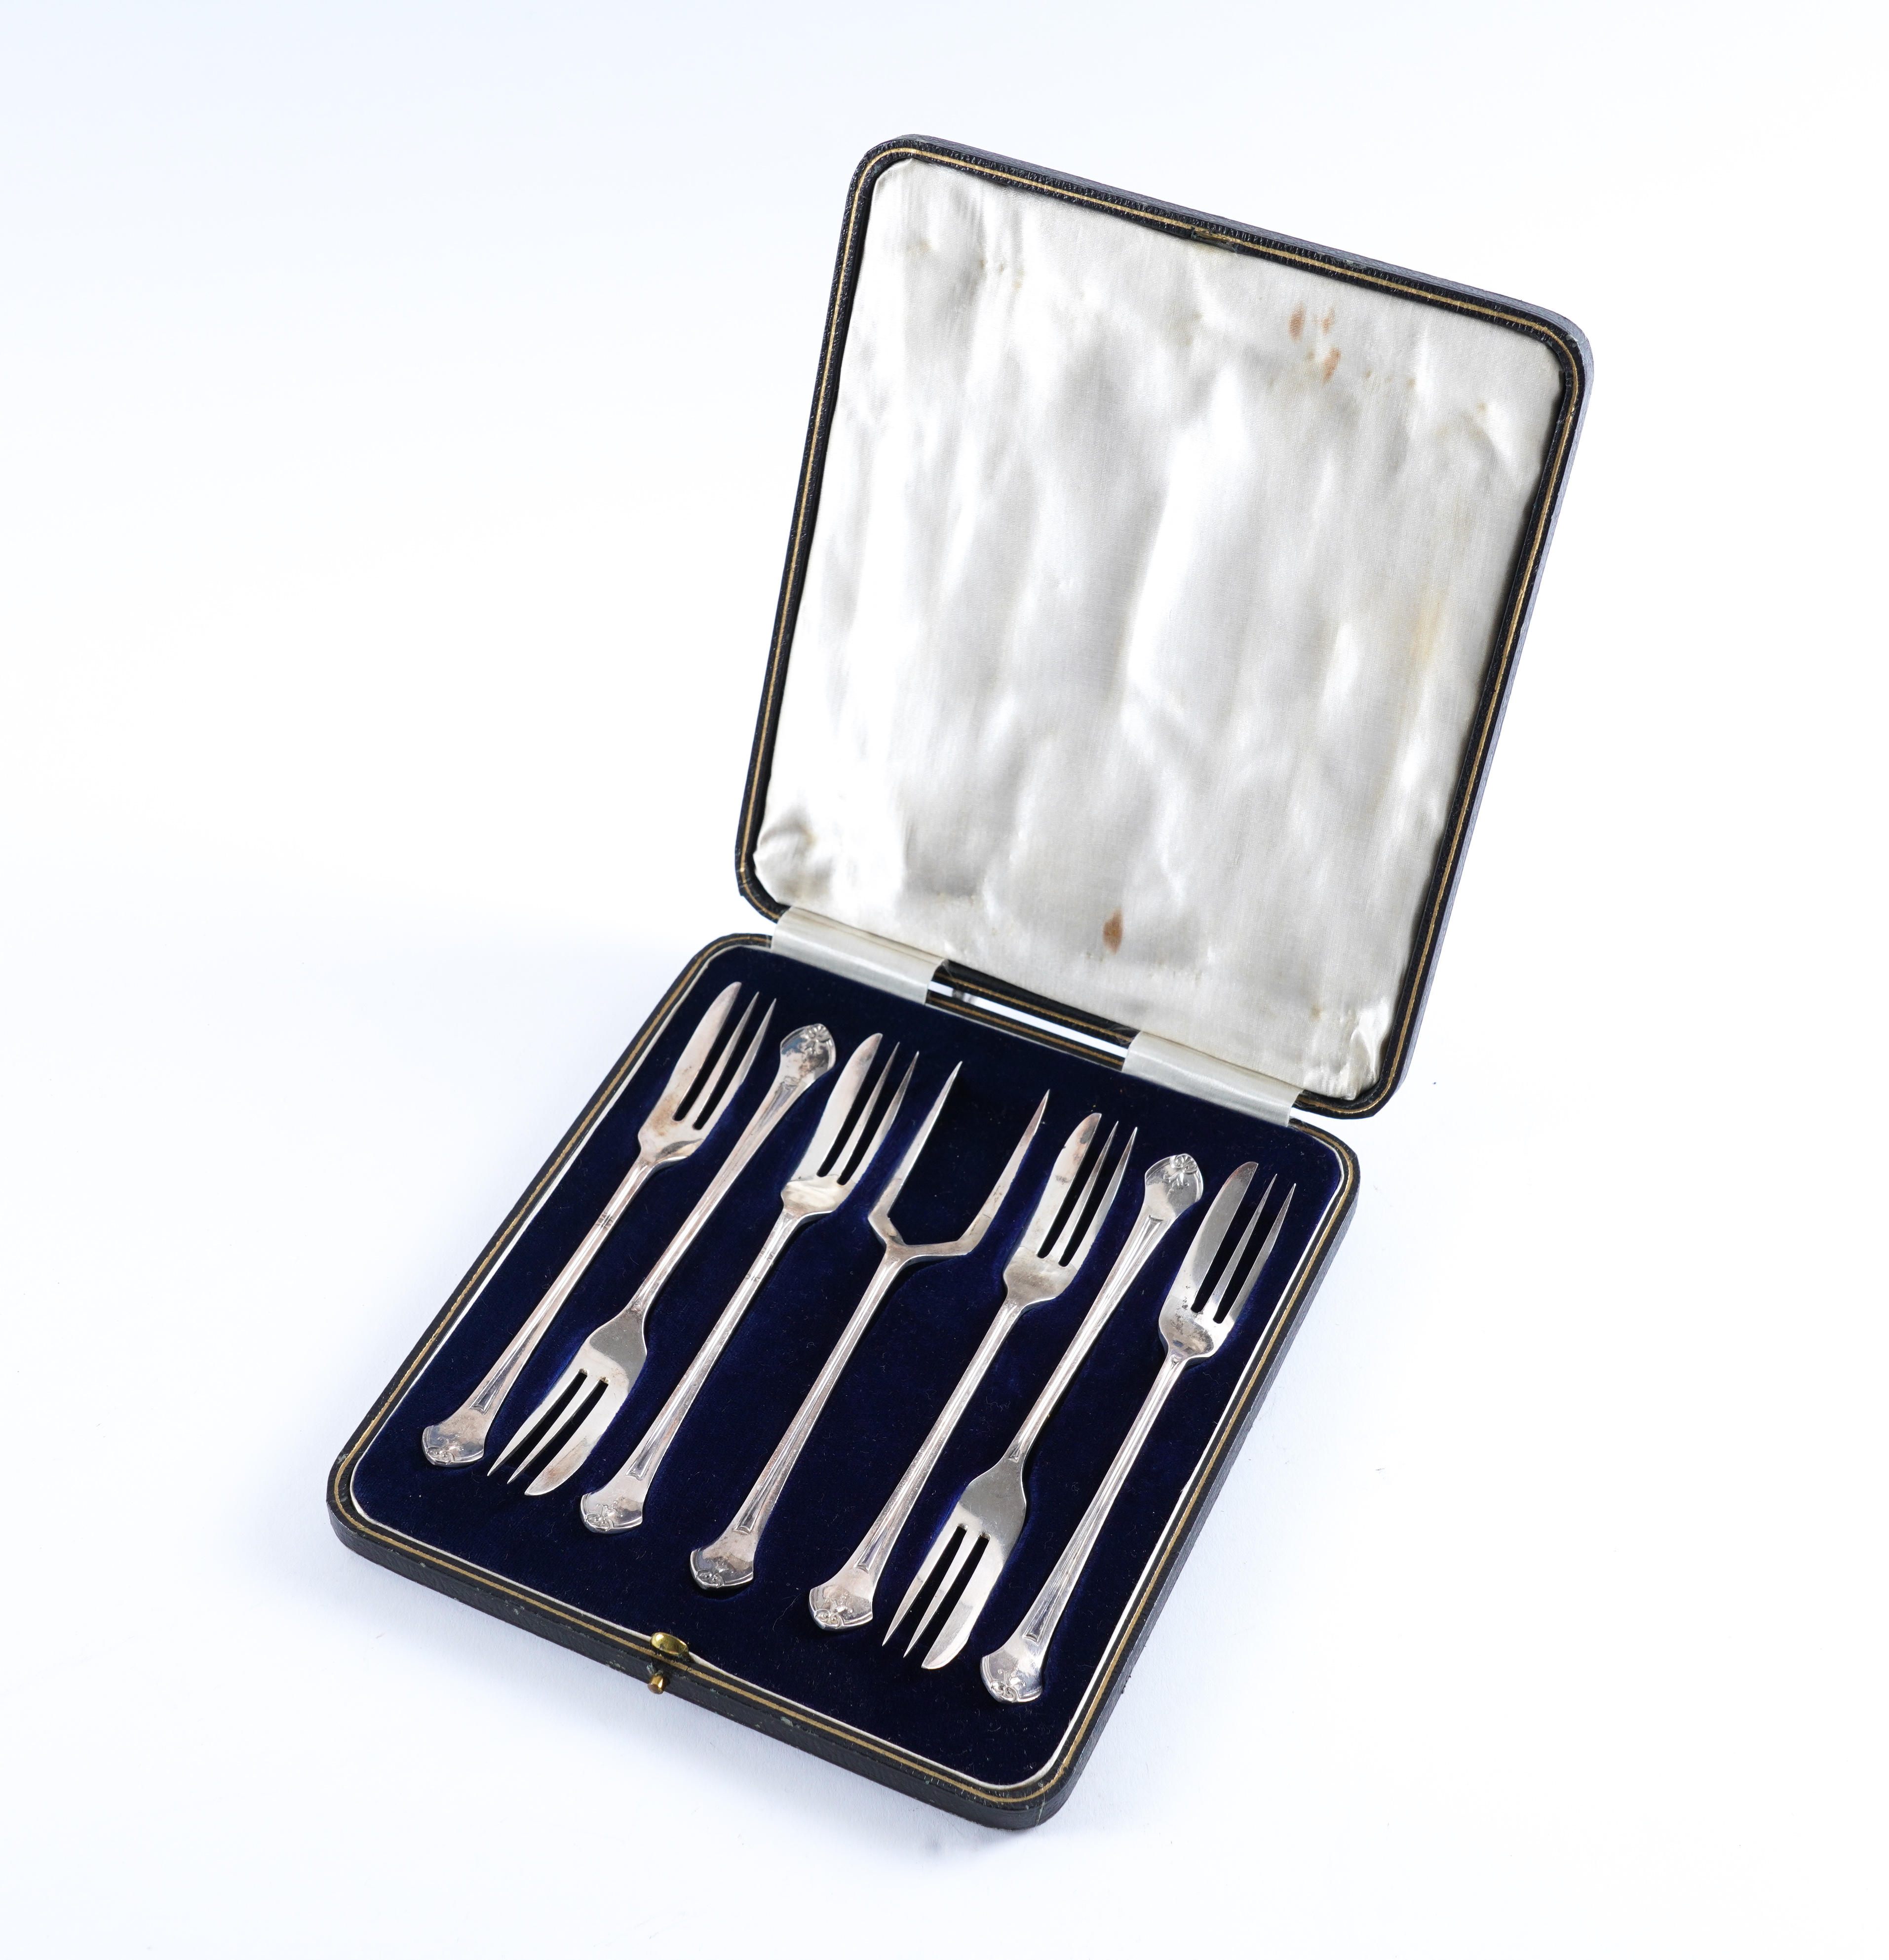 A SET OF SIX SILVER PASTRY FORKS